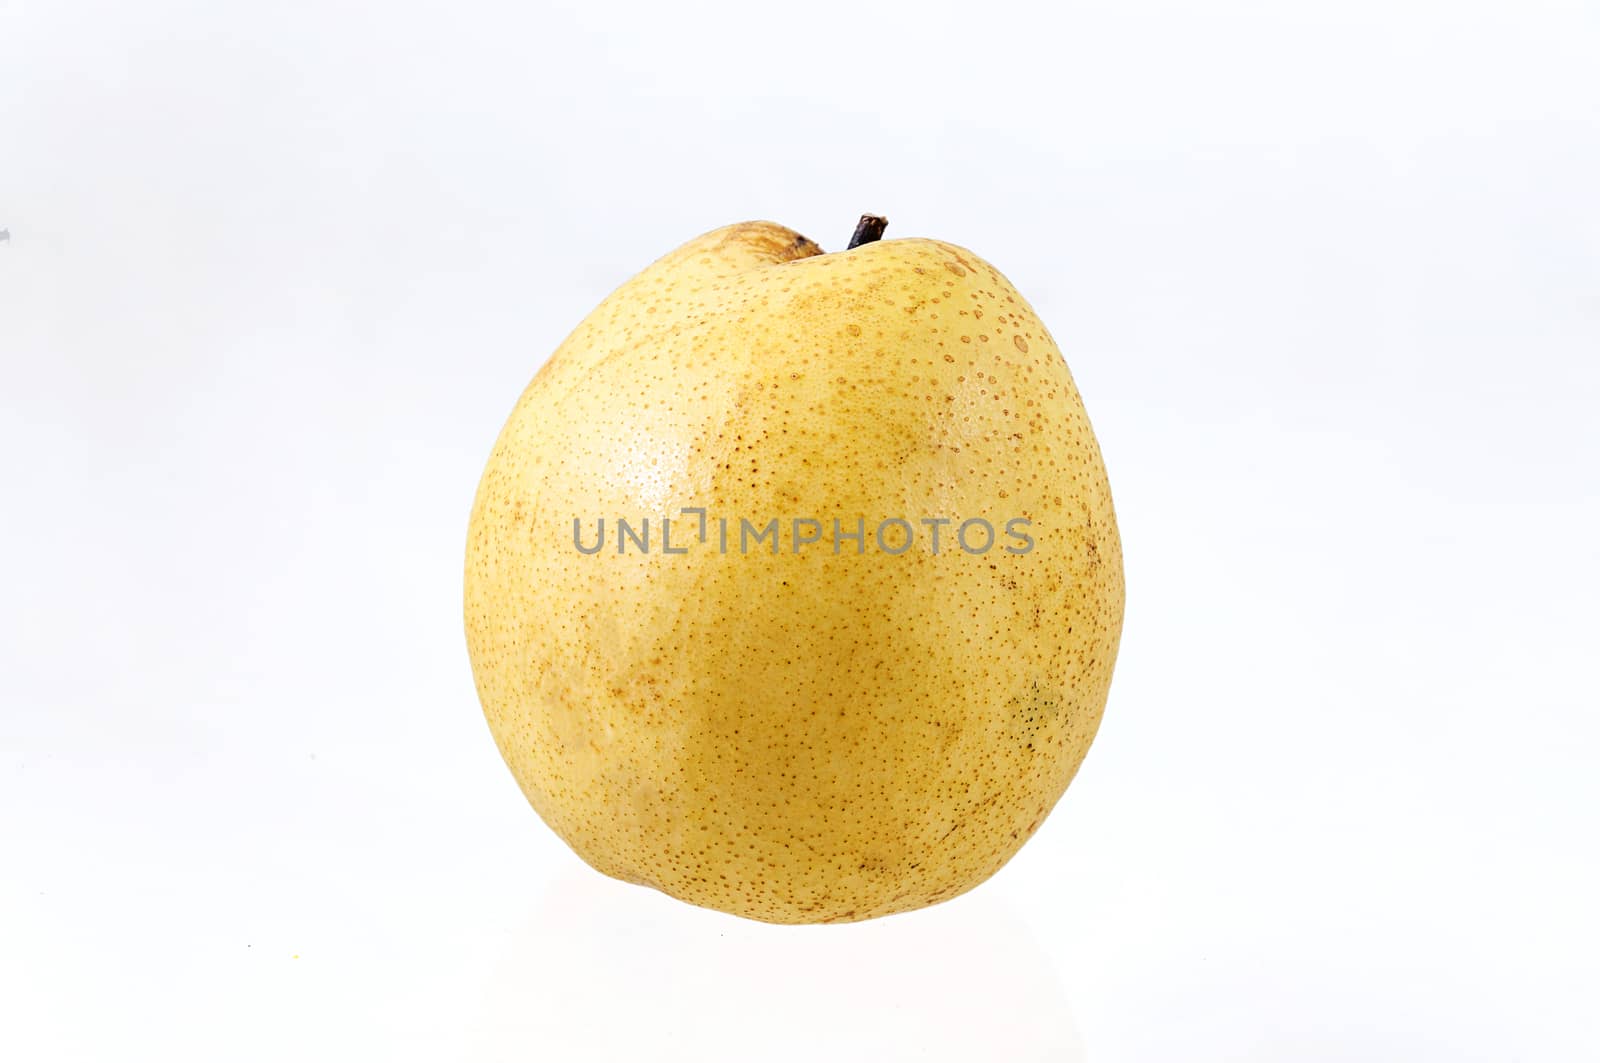 Chinese pear by NuwatPhoto